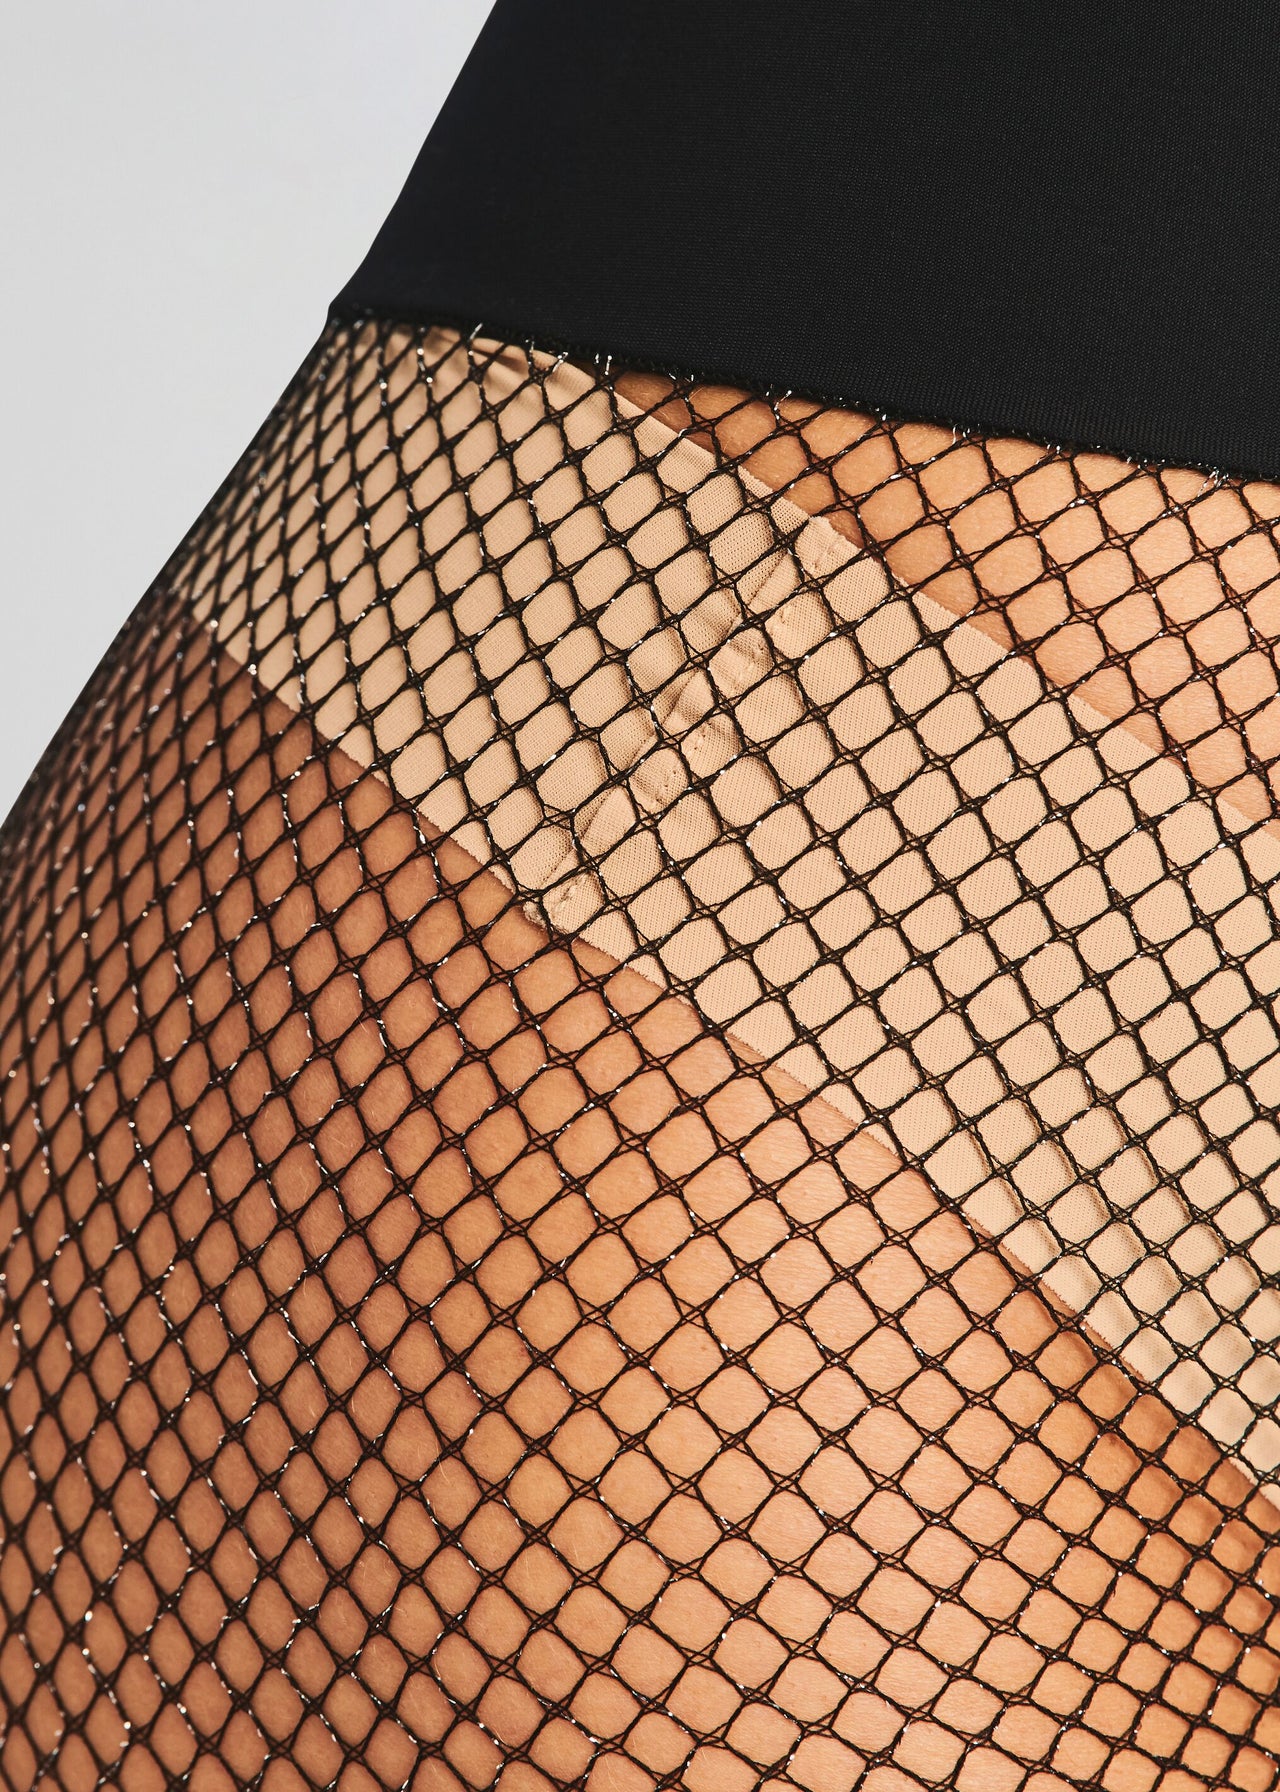 The Very Fine Fishnet Tight